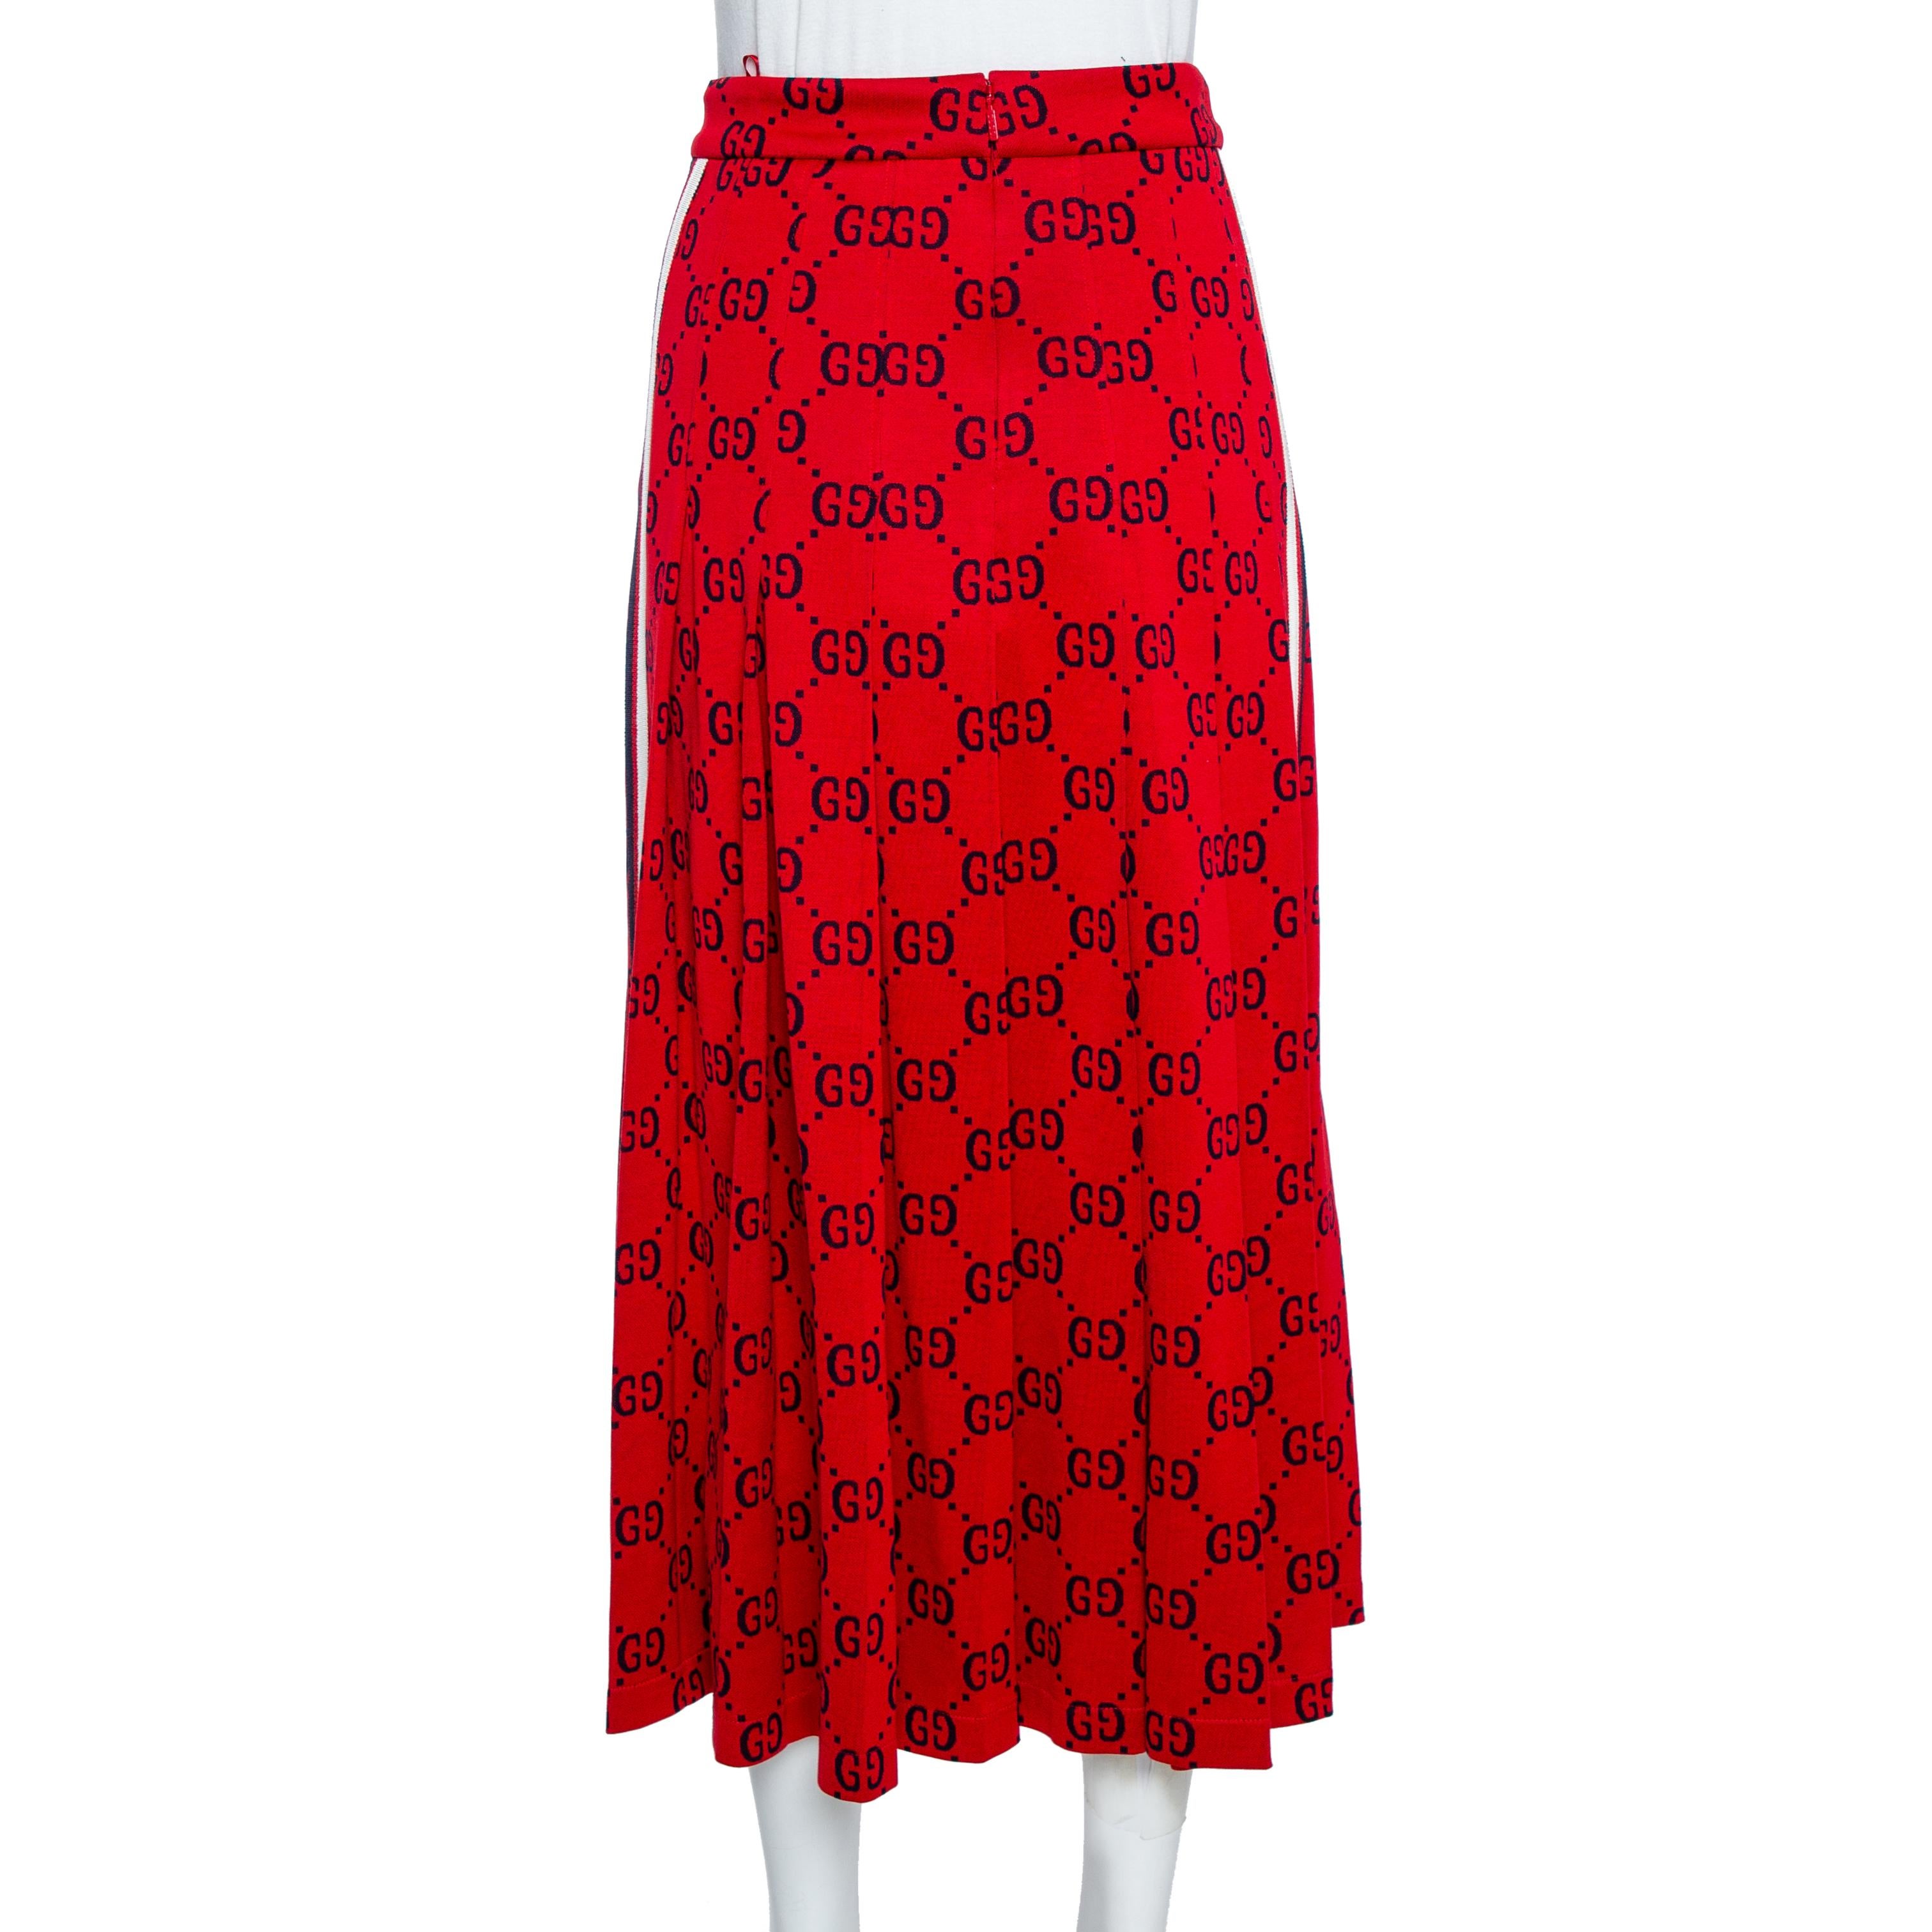 Gucci continues to incorporate original design elements into new collections. The emblematic monogram motif from the 1970s is presented on this skirt. The Sylvie Web stripe enhancing the sides is reminiscent of vintage tracksuits, and the creation